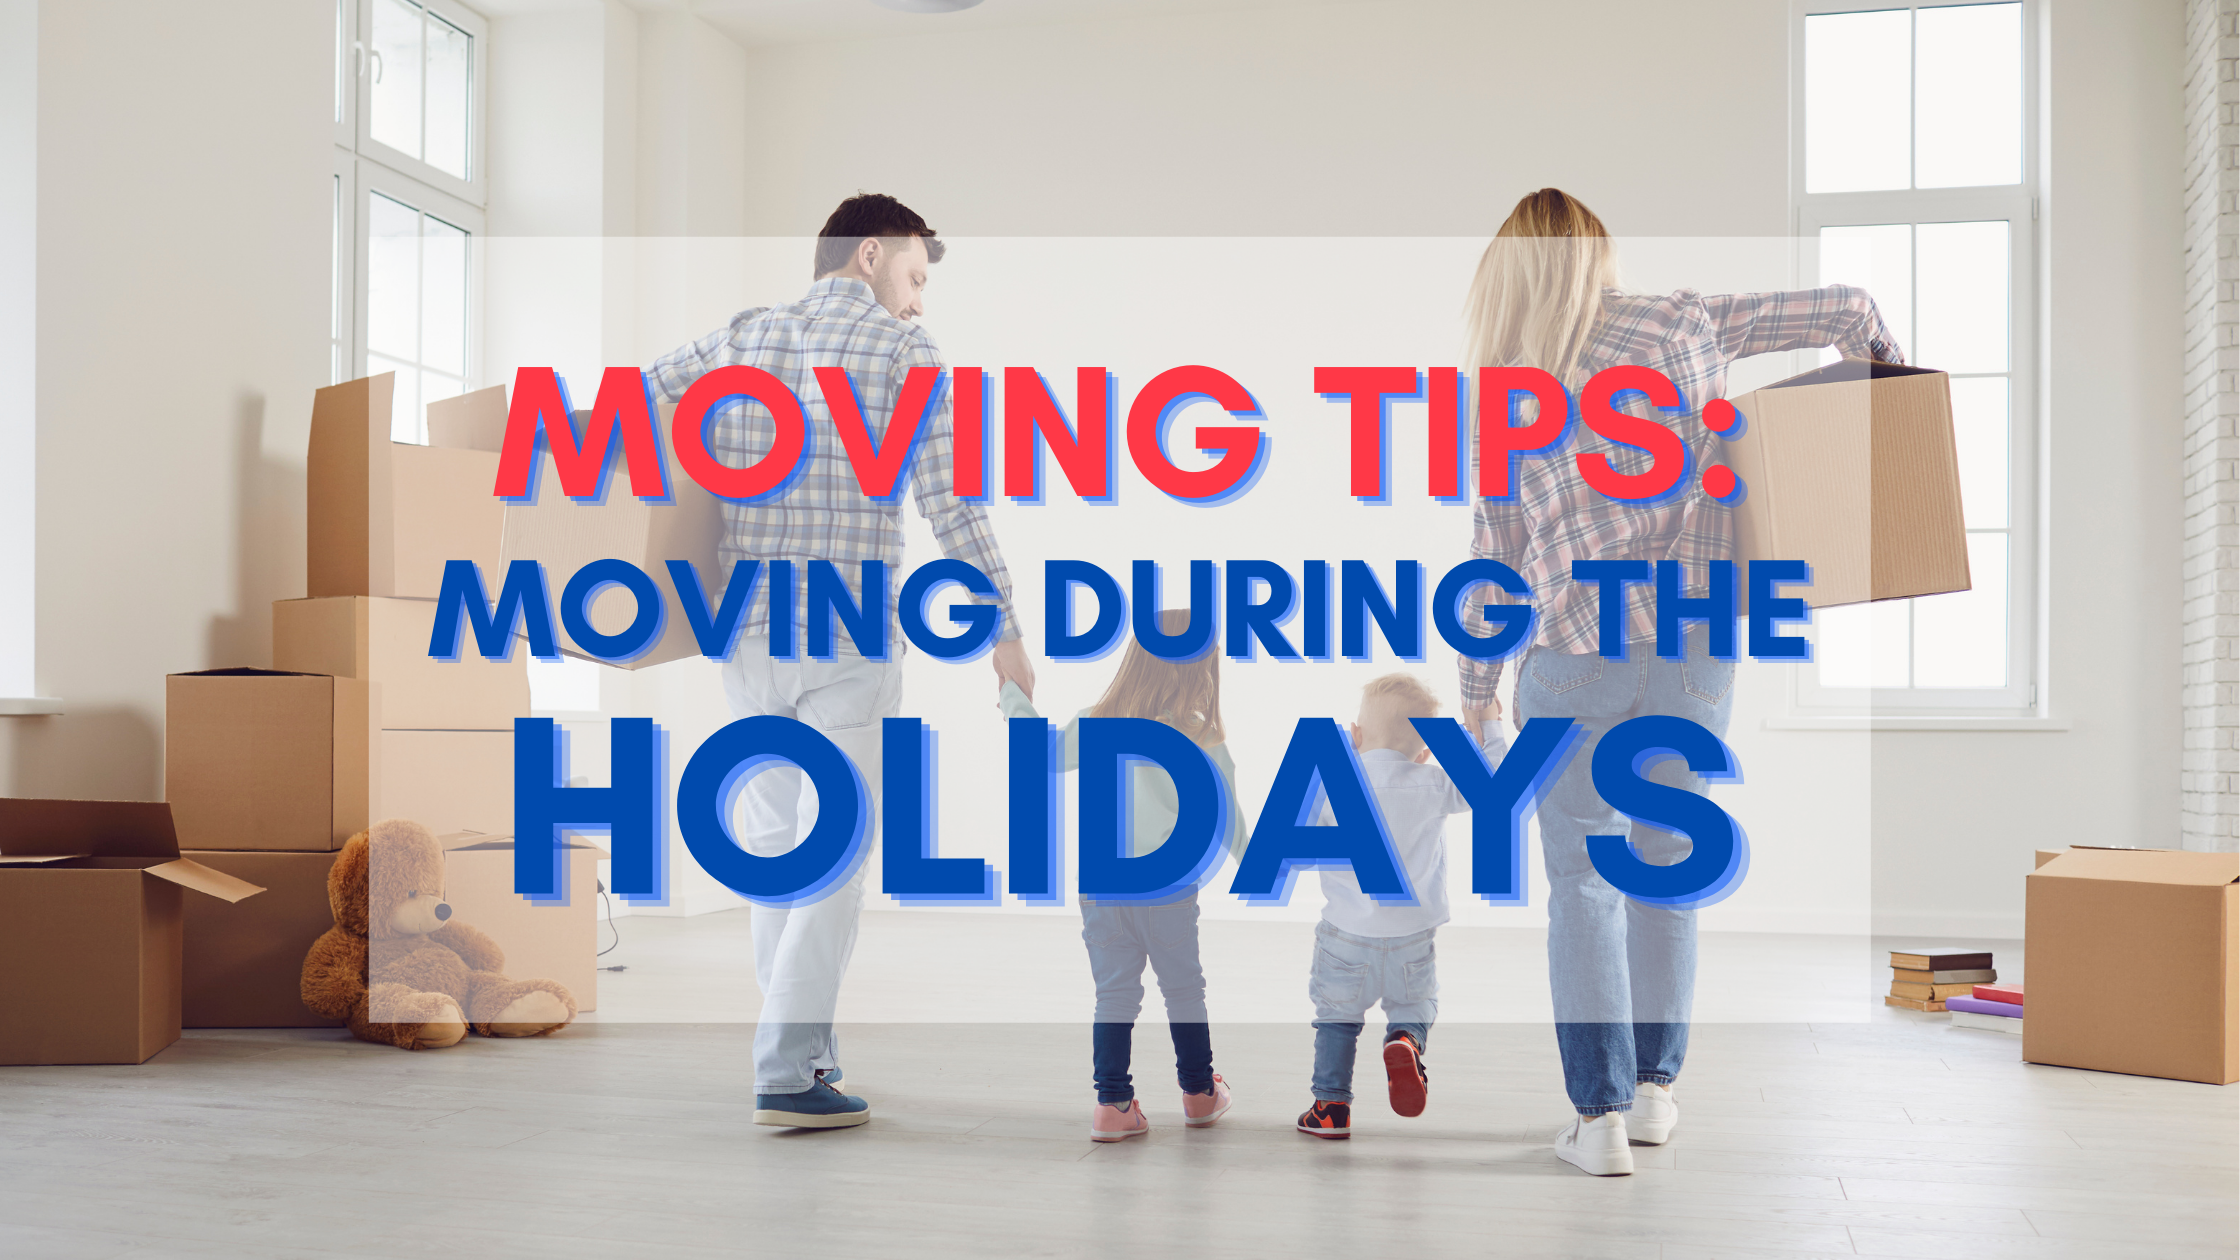 Moving Tips: Moving During the Holidays